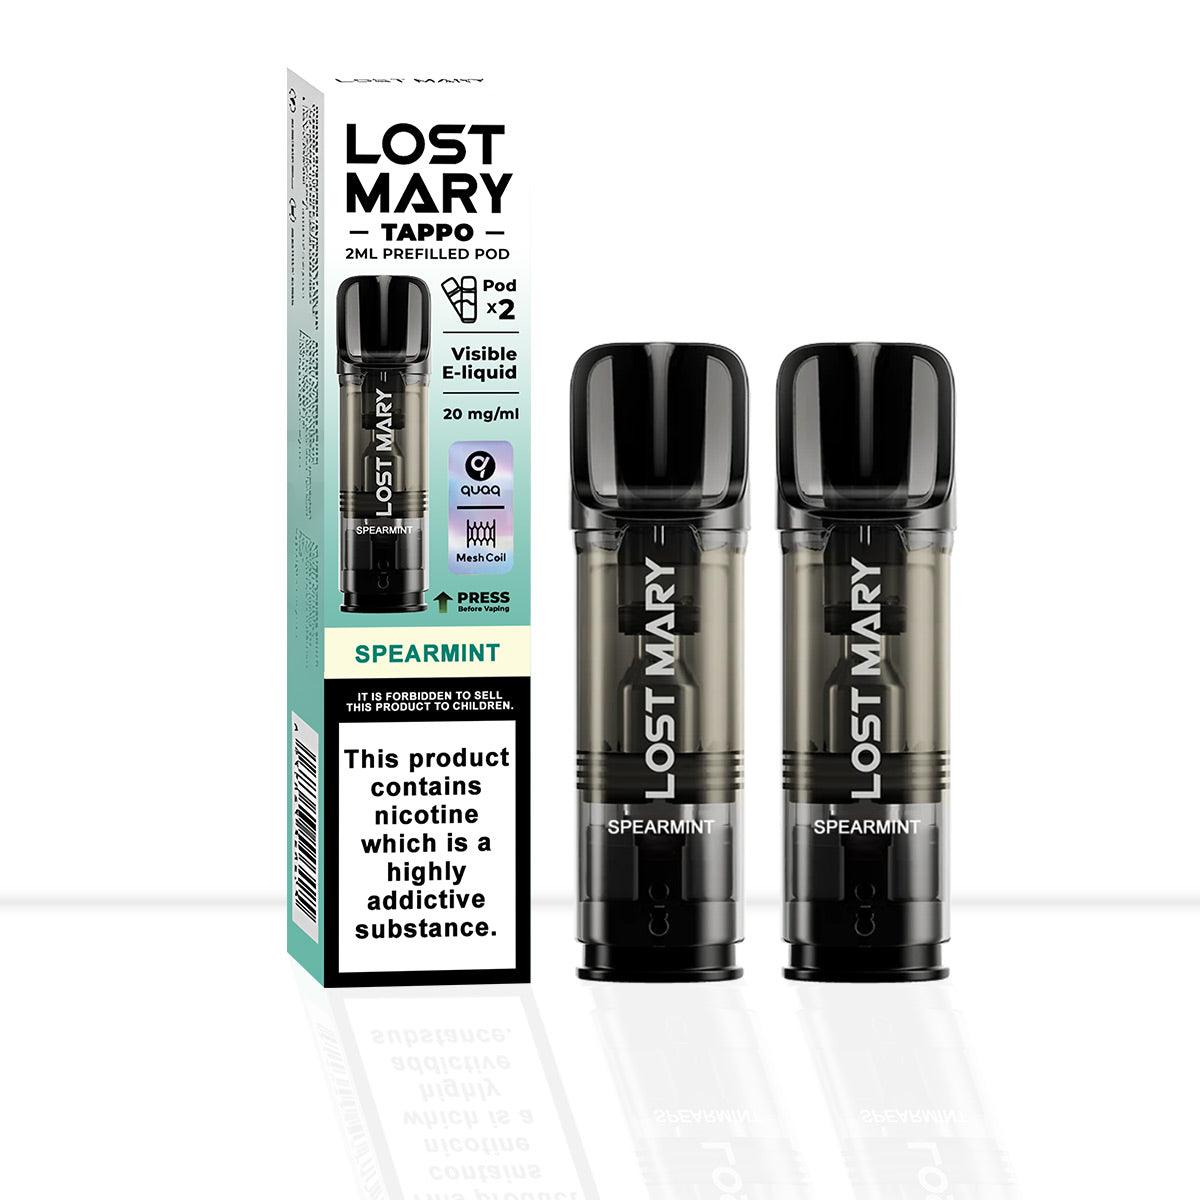 Lost Mary Tappo Spearmint Vape Pods - Lost Mary Tappo Spearmint Vape Pods - Pod & Refills